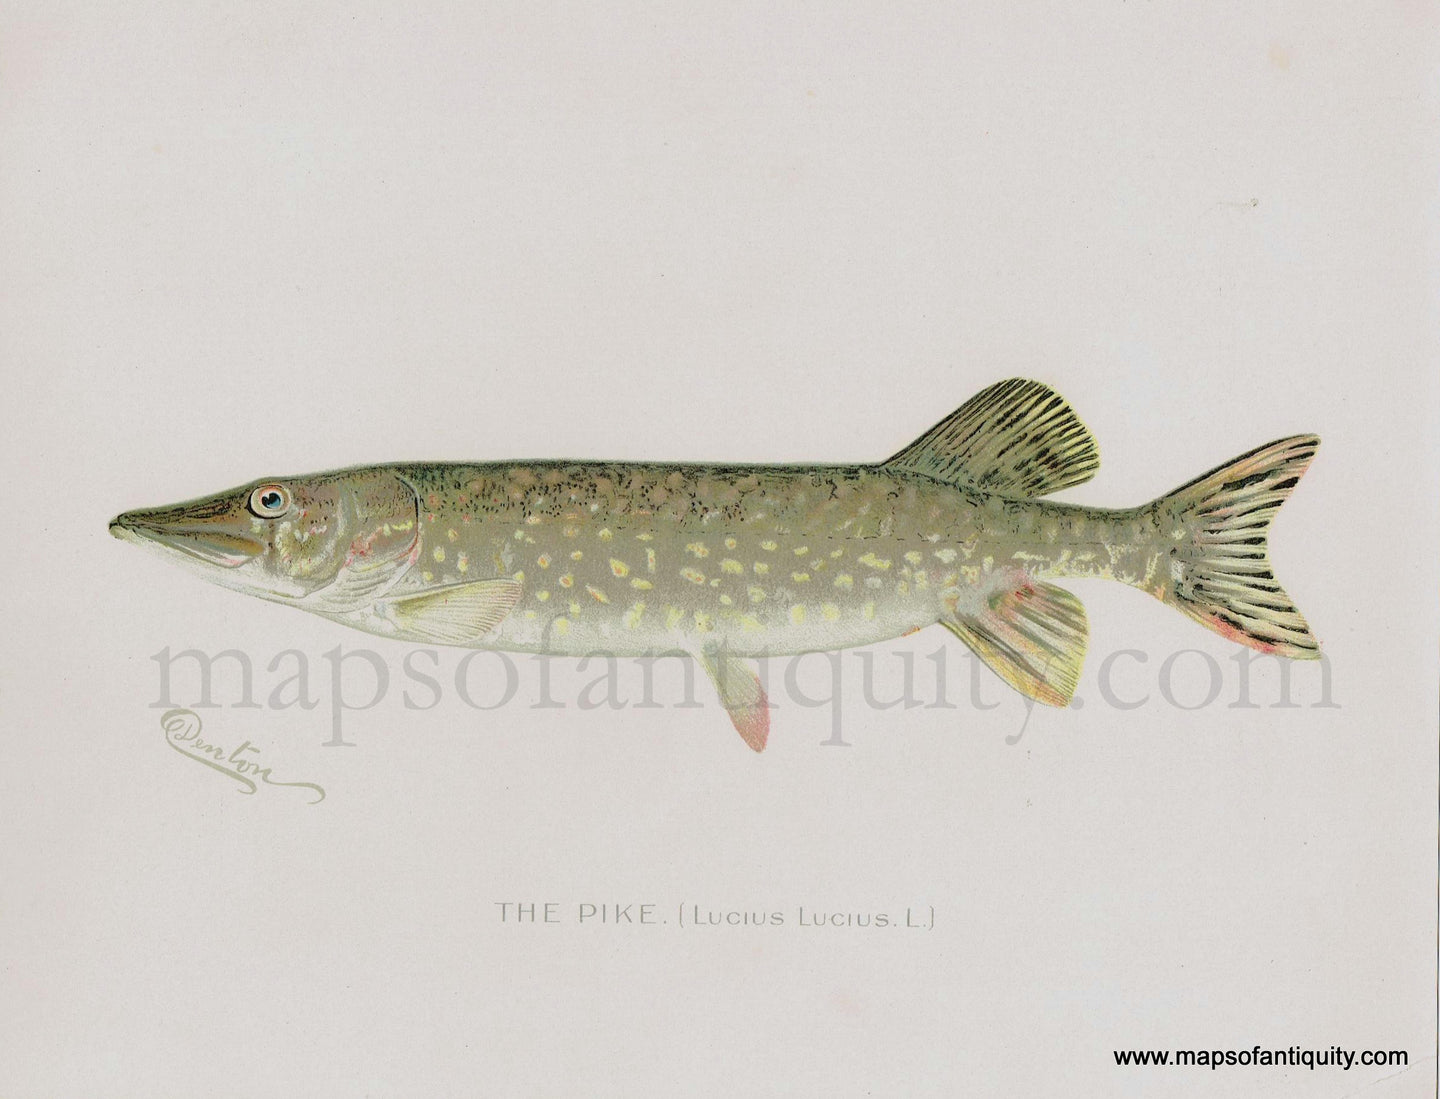 Antique-Print-The-Pike-Denton-Fish-Prints-Maps-of-Antiquity